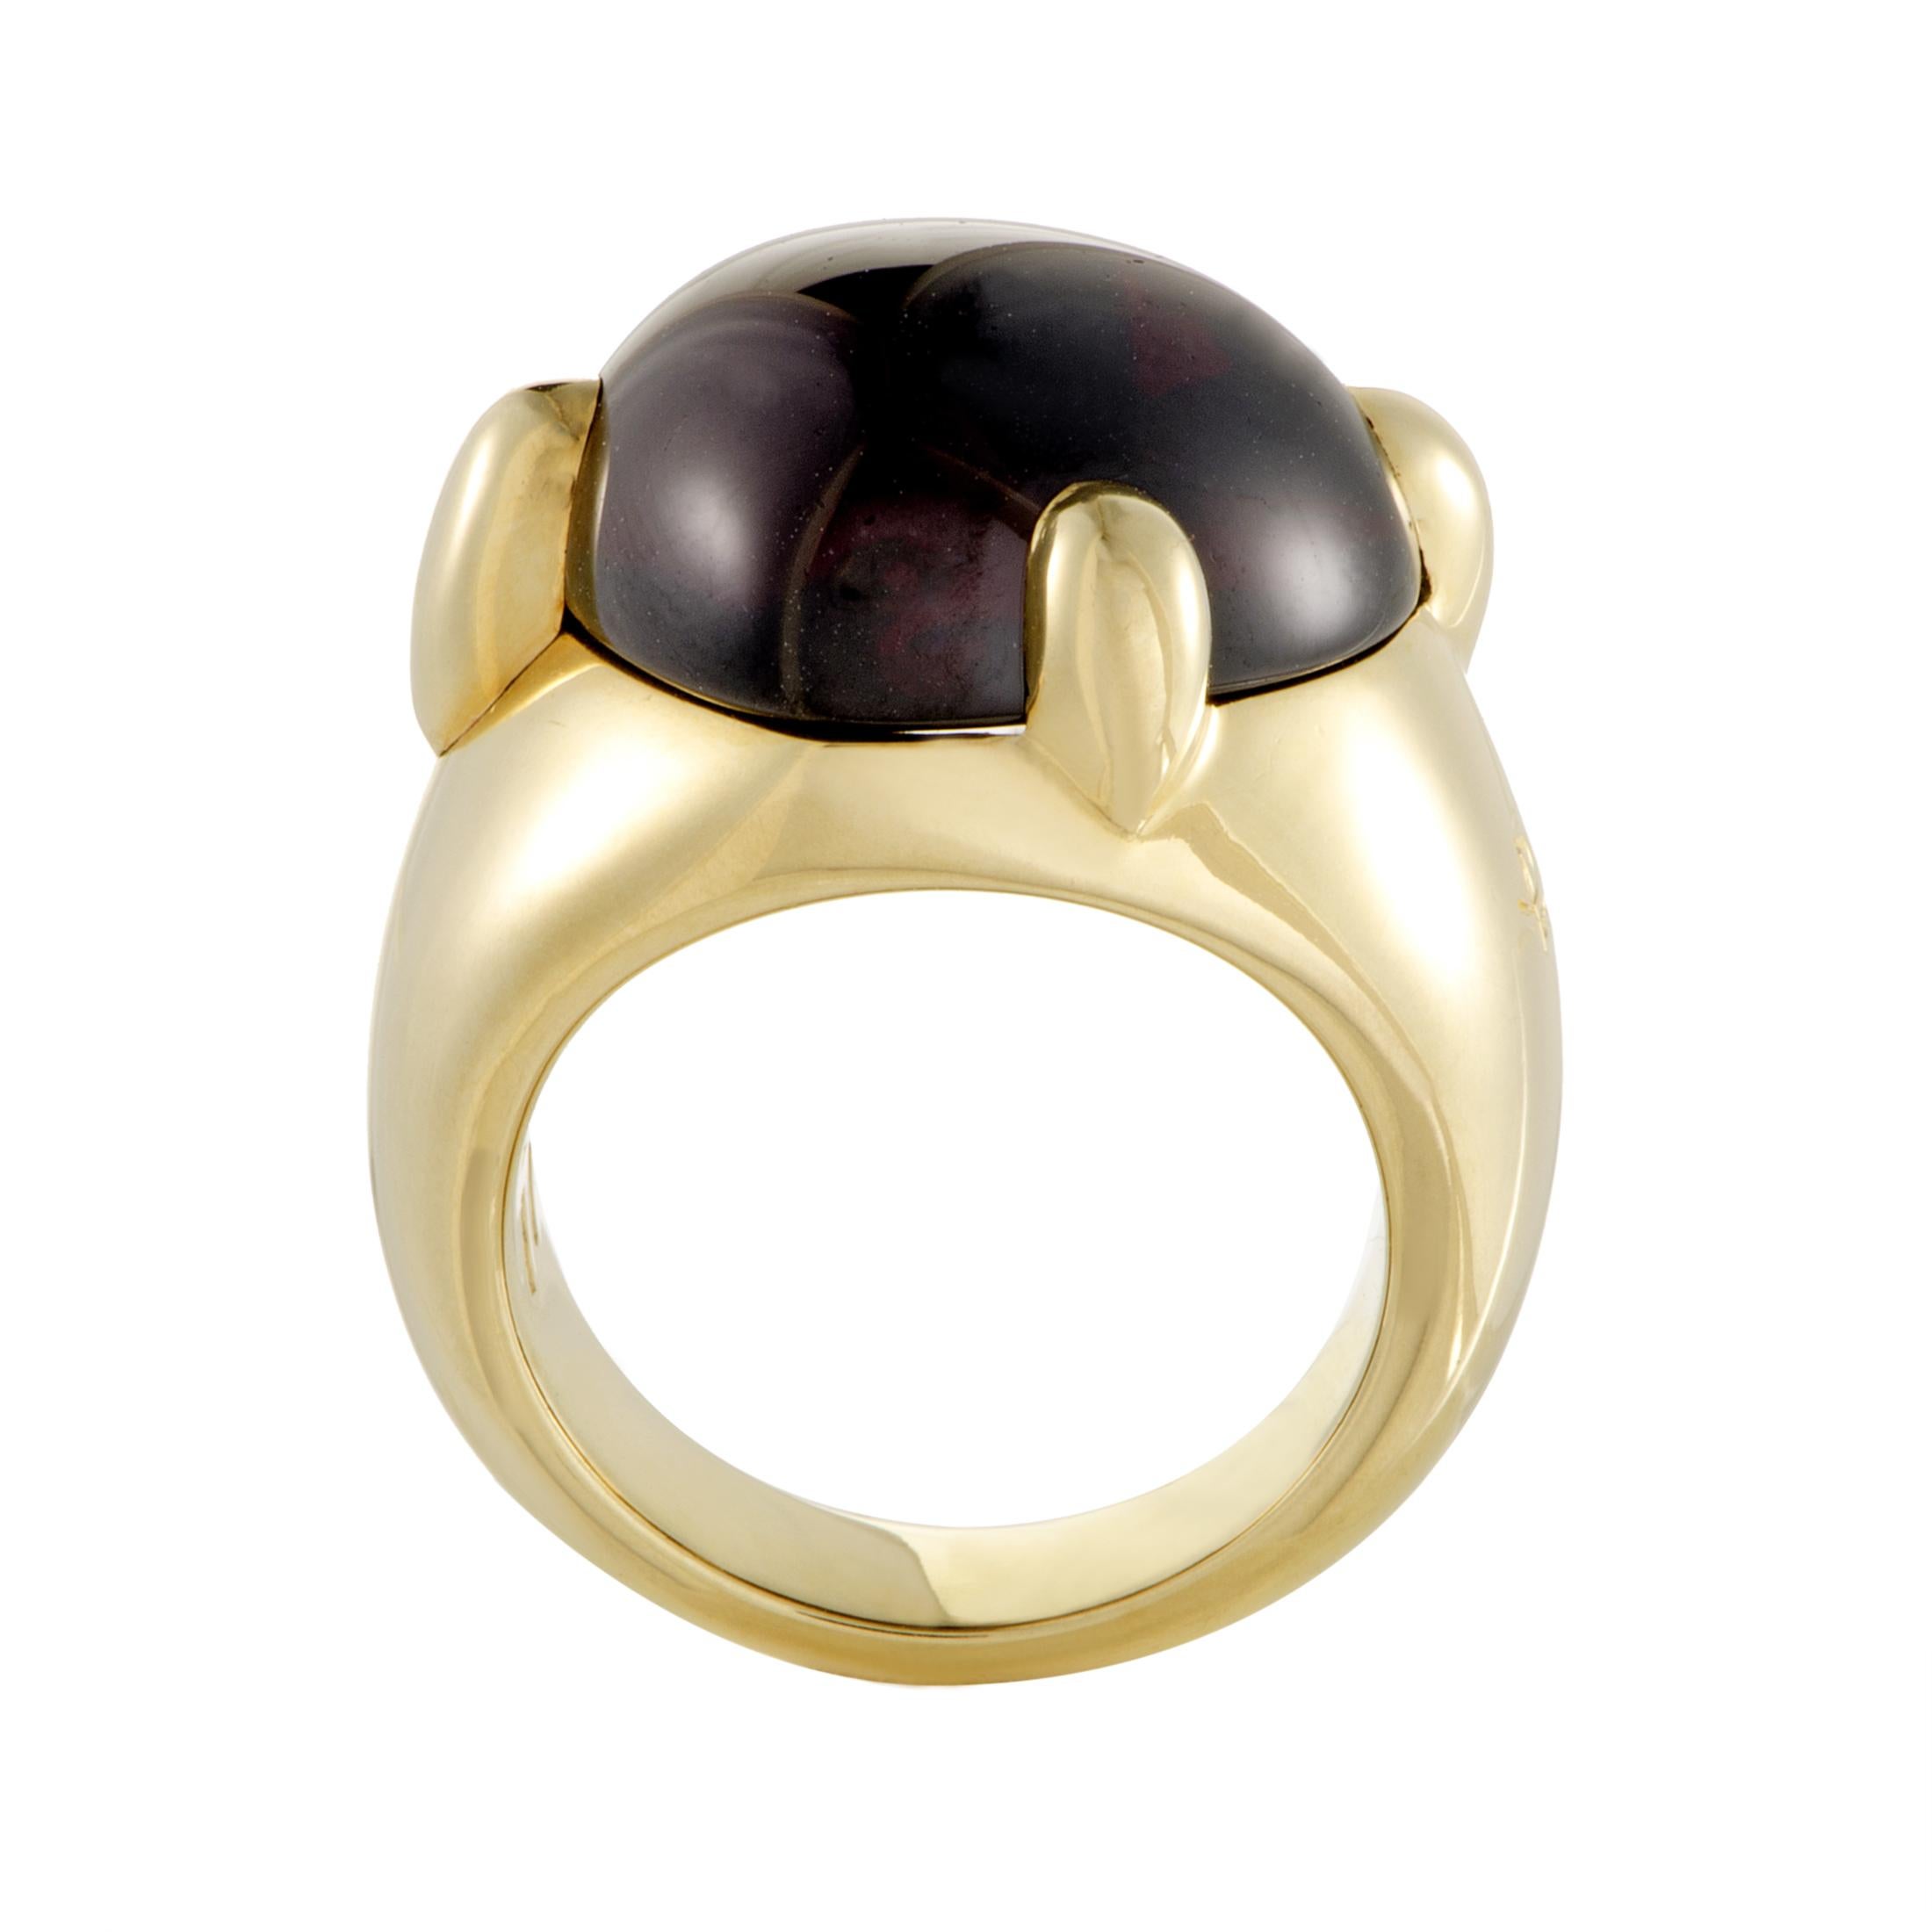 The Pomellato “Capri” ring is crafted from 18K yellow gold and set with a garnet. The ring weighs 19.6 grams, boasting band thickness of 6 mm and top height of 10 mm, while top dimensions measure 20 by 17 mm.

Offered in estate condition, this